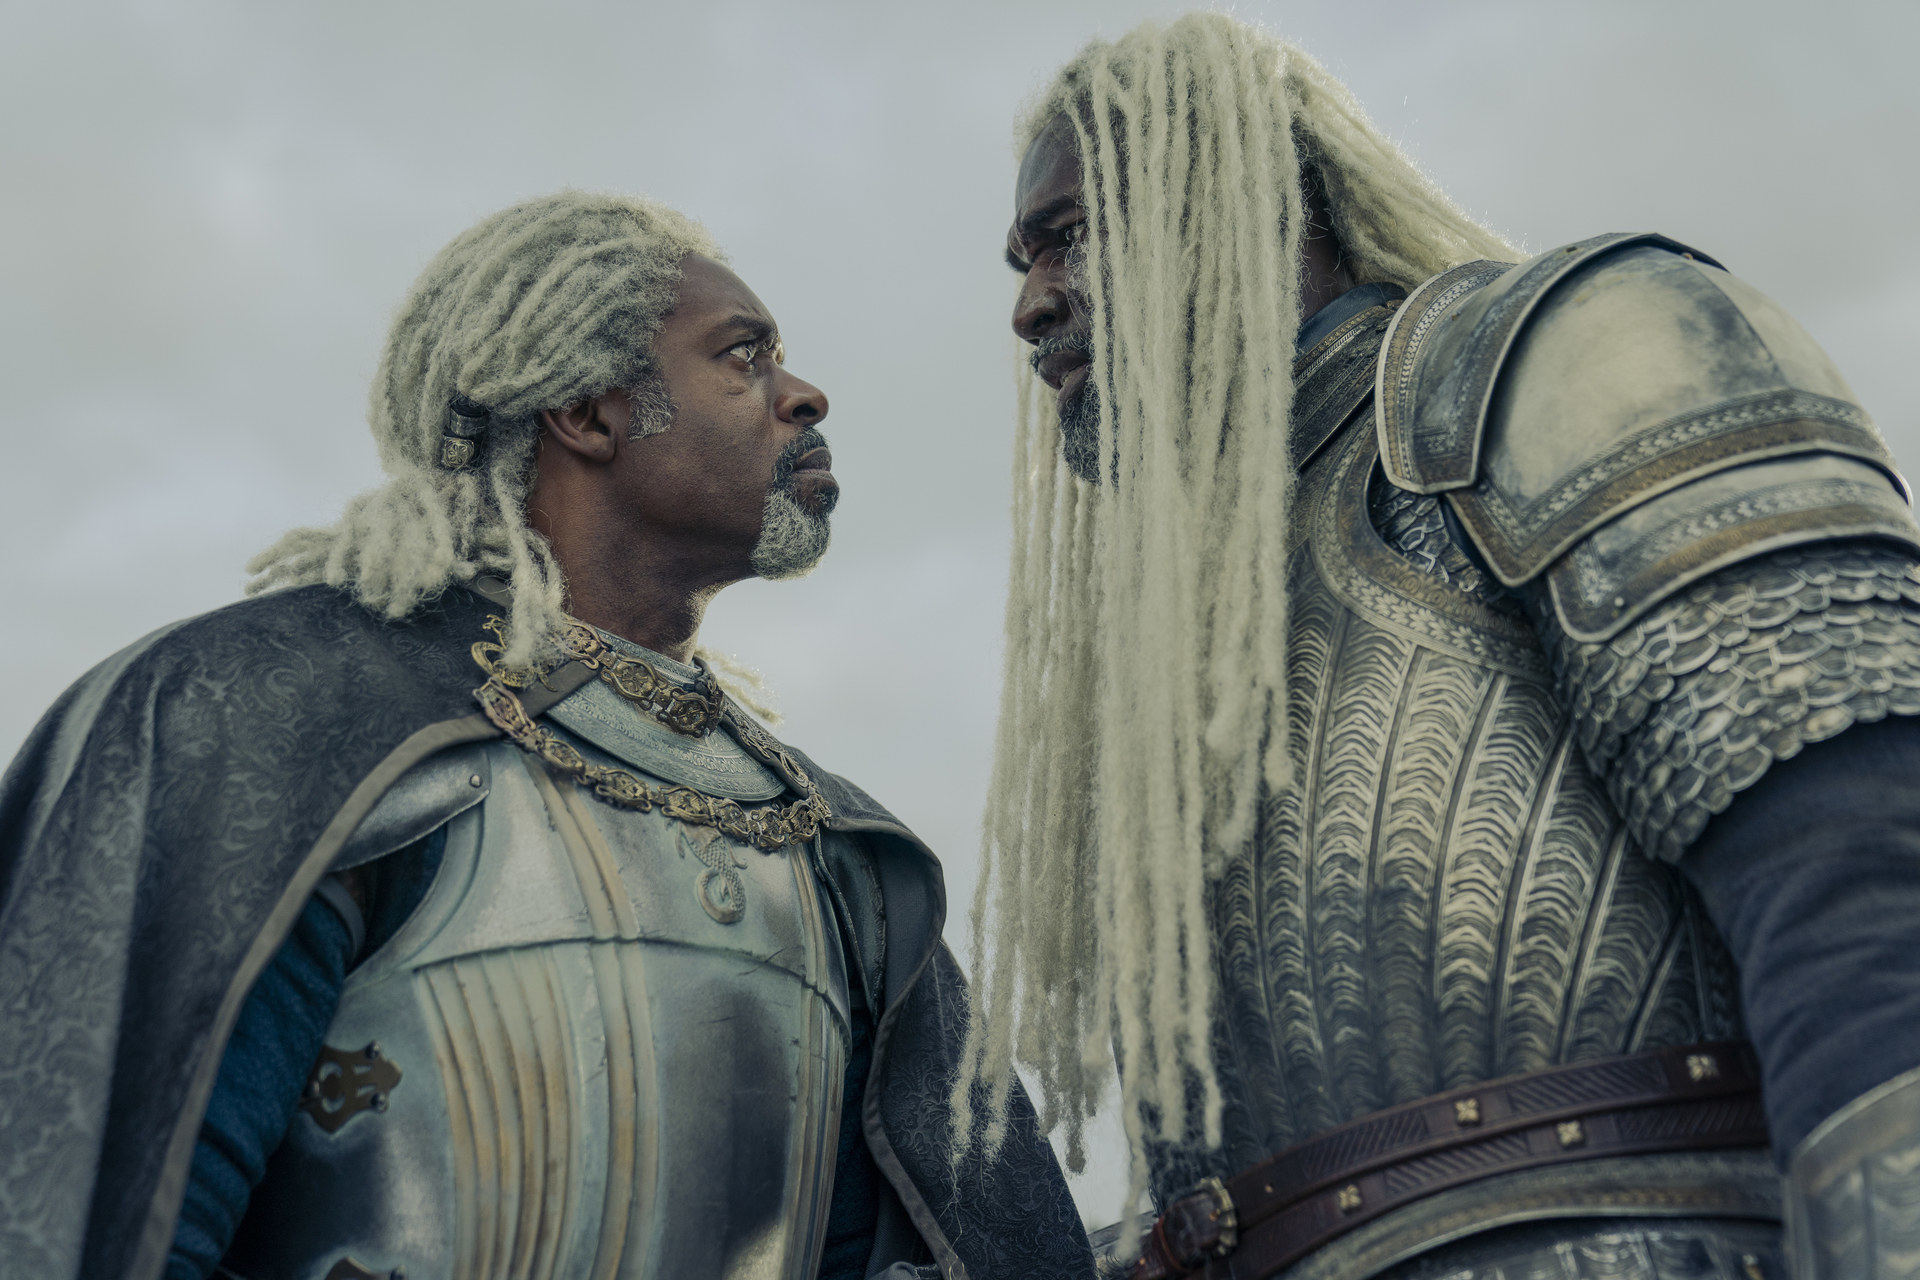 Vaemond  and Corlys talk while wearing armor